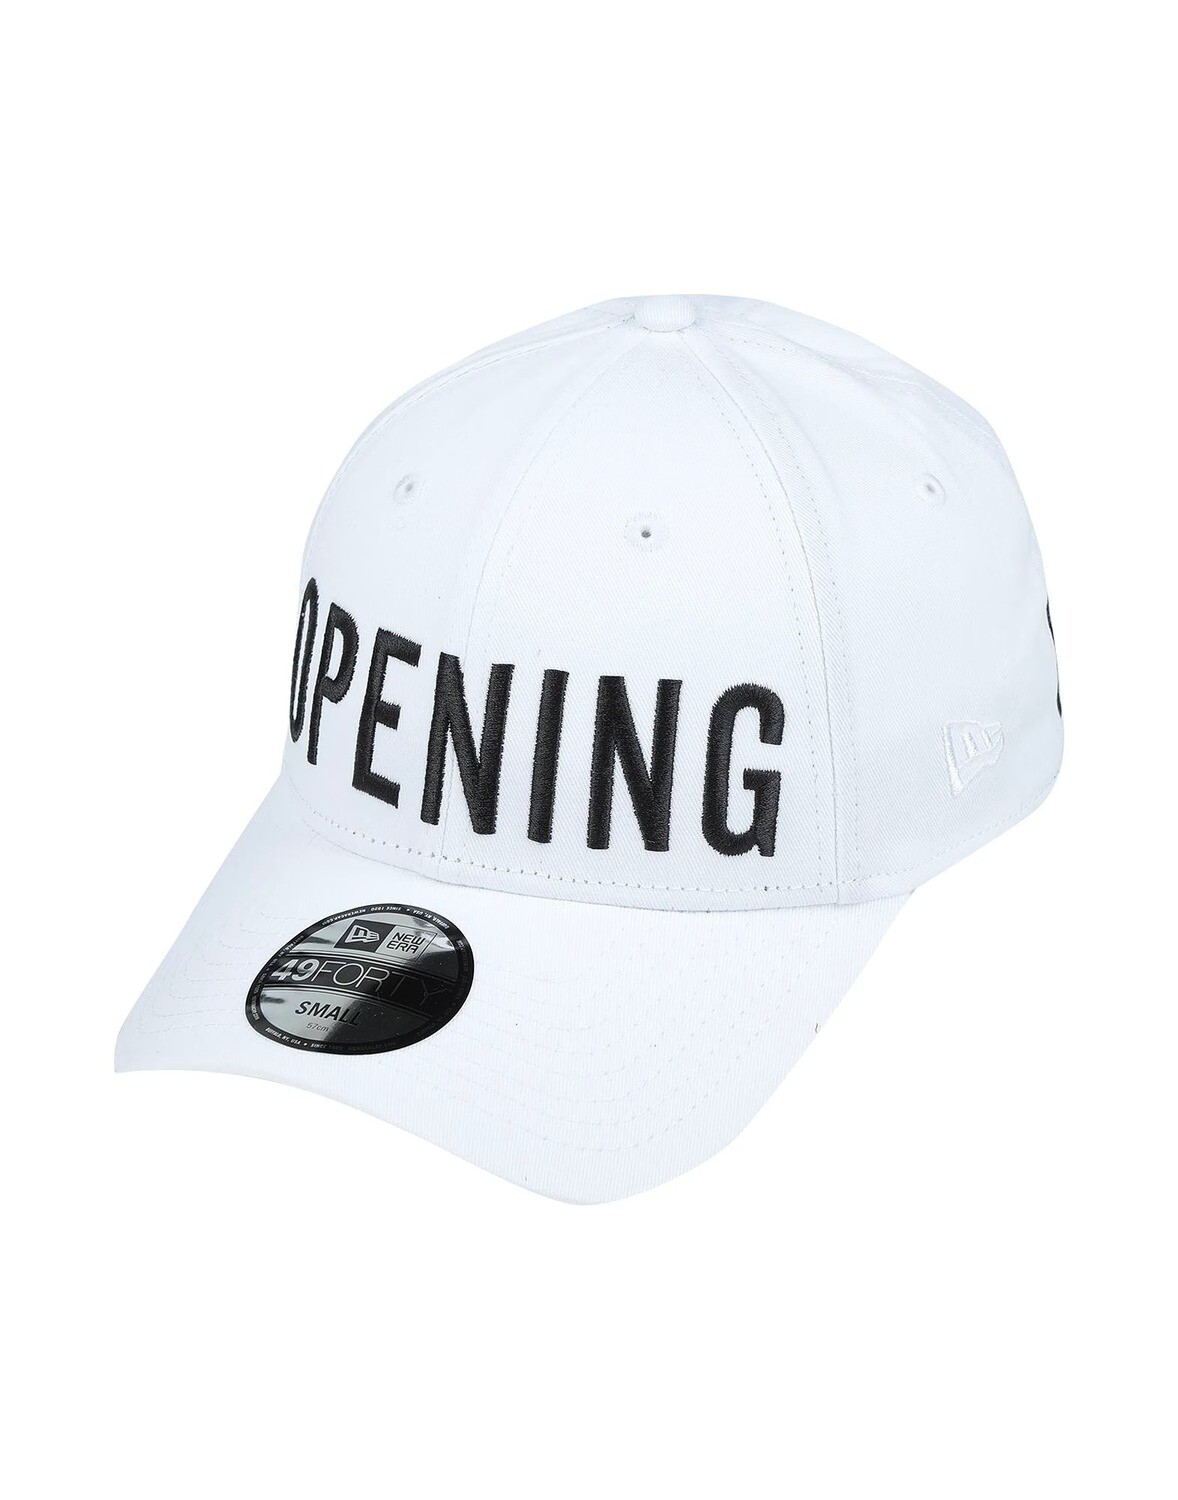 Casquette tendance blanche - Collab New Era/ Opening Ceremony